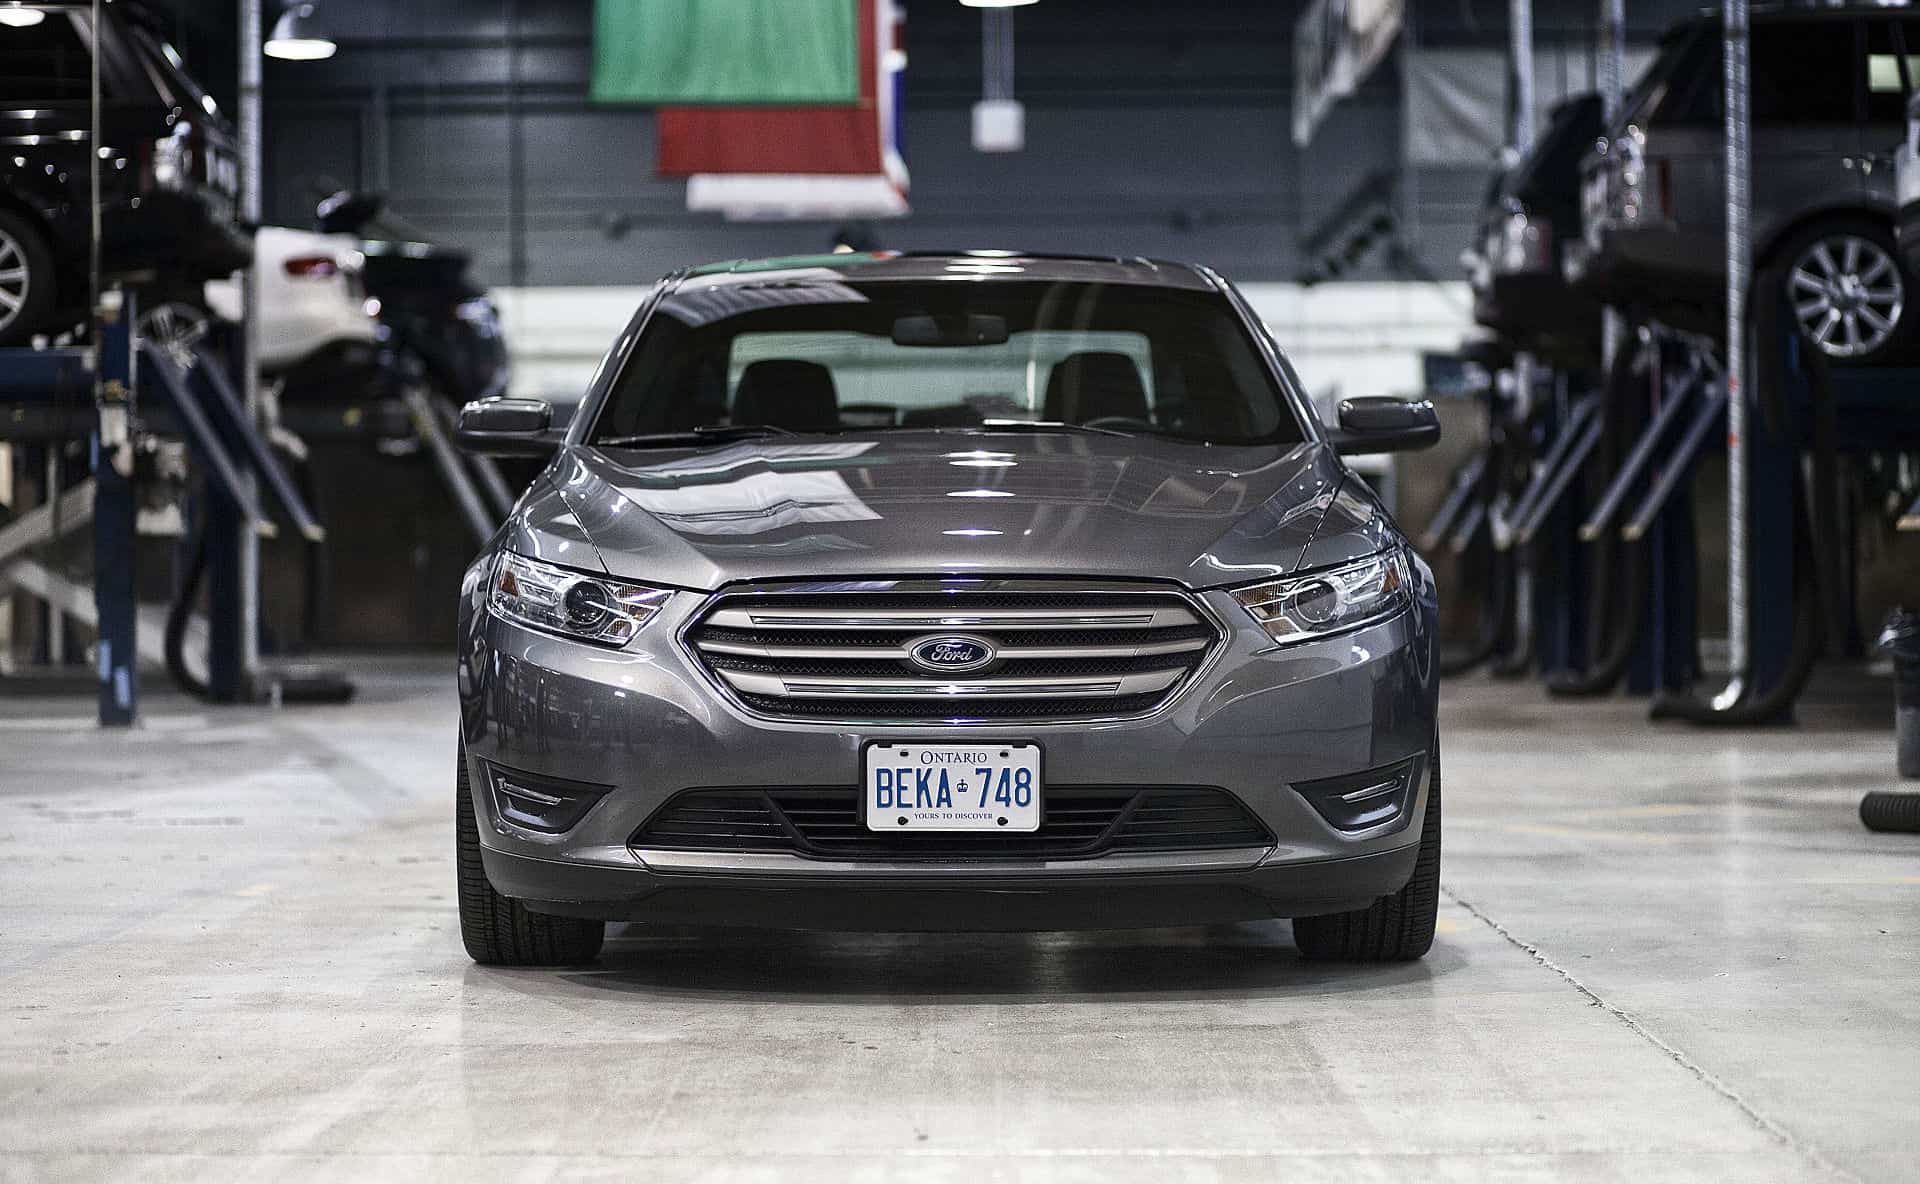 2013 Ford Taurus front picture